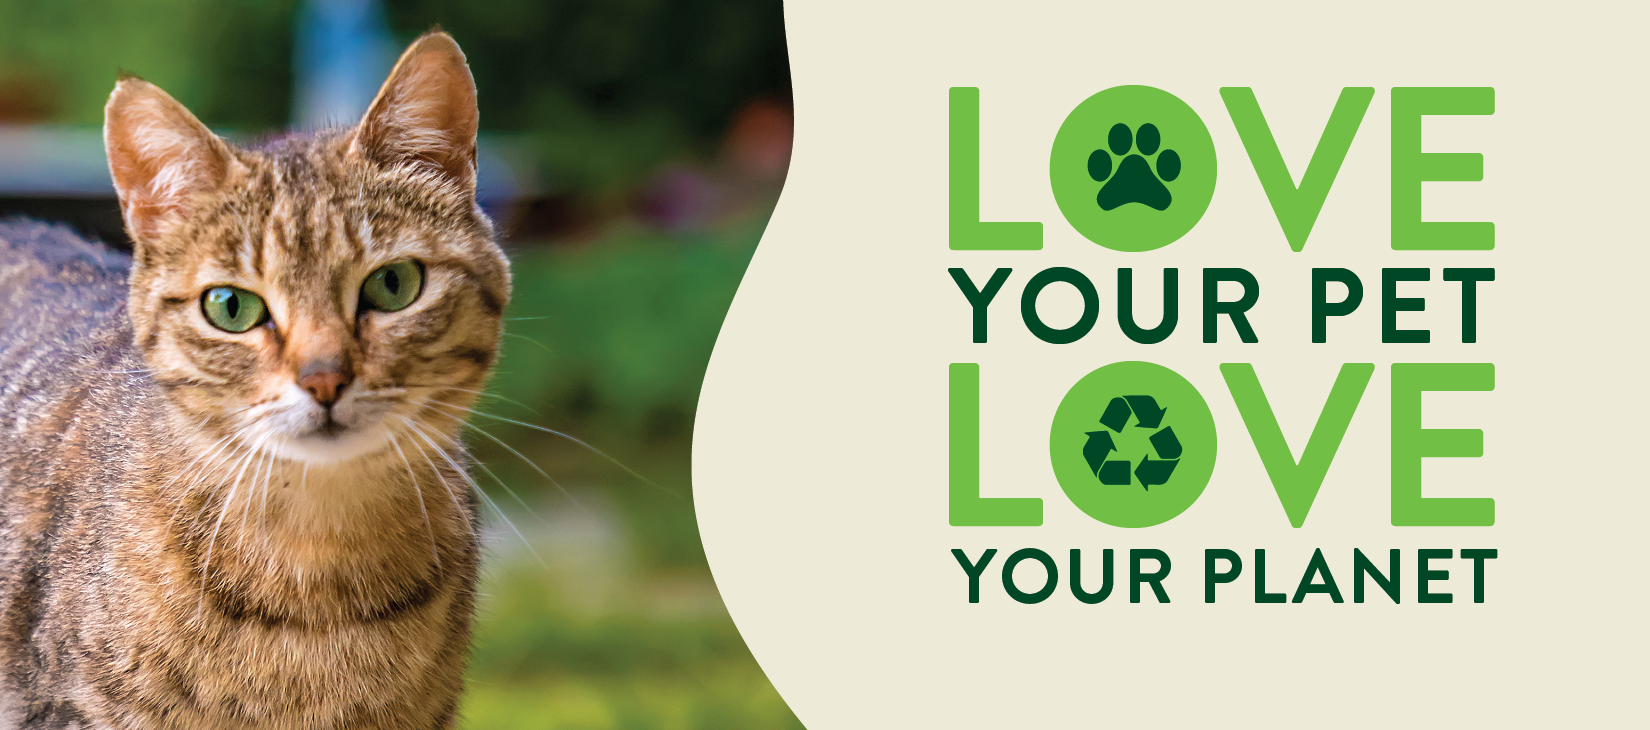 Love your pet, love your planet